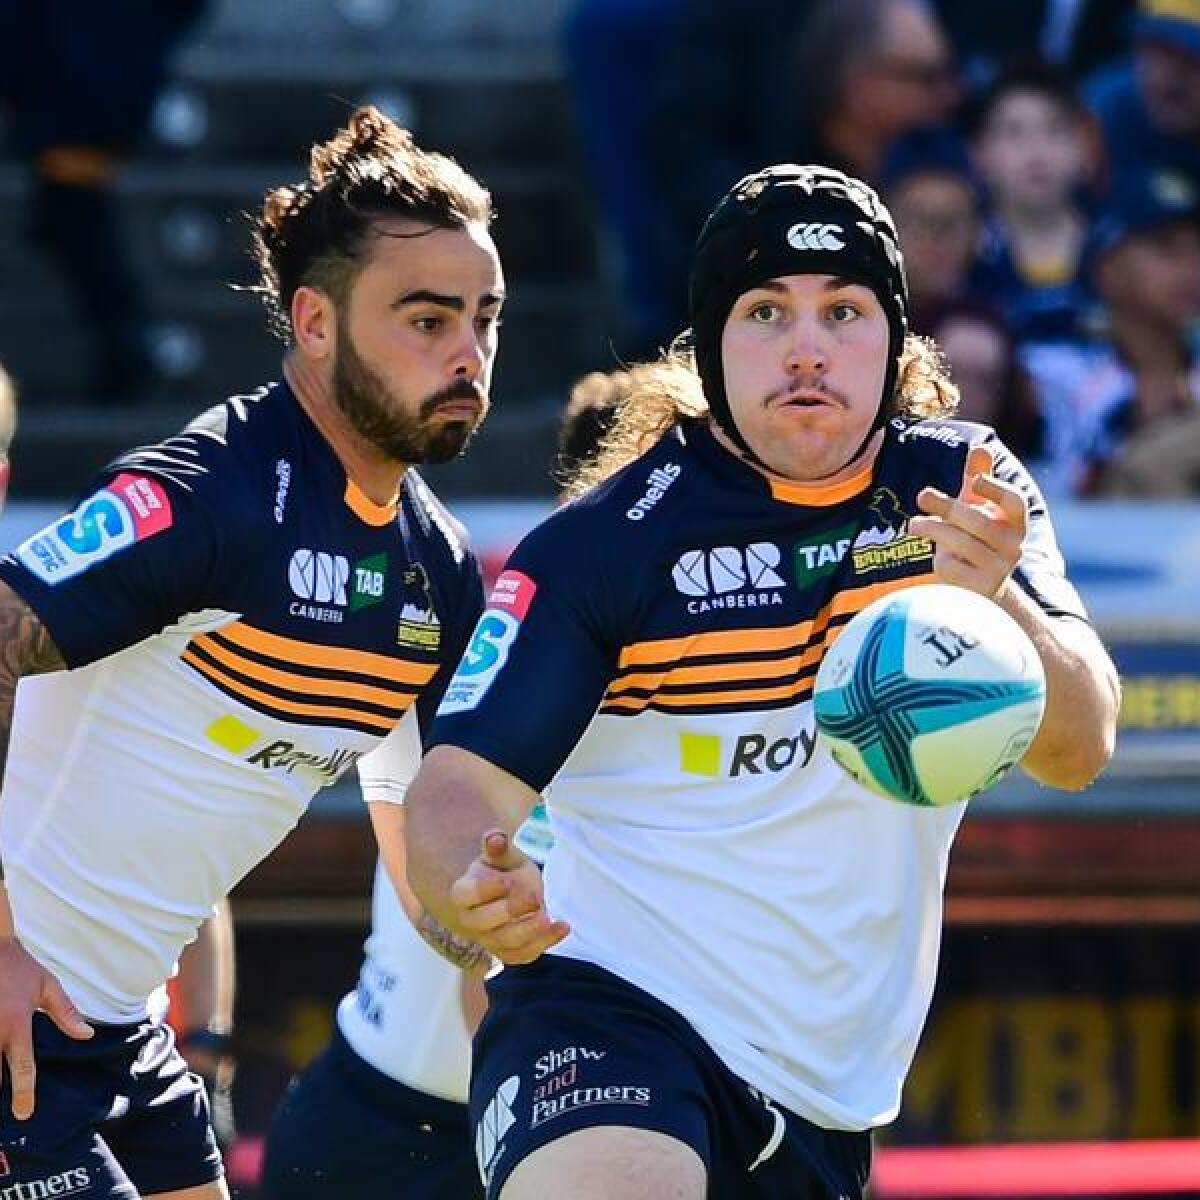 Lachie Lonerrgan of the ACT Brumbies passes the ball.